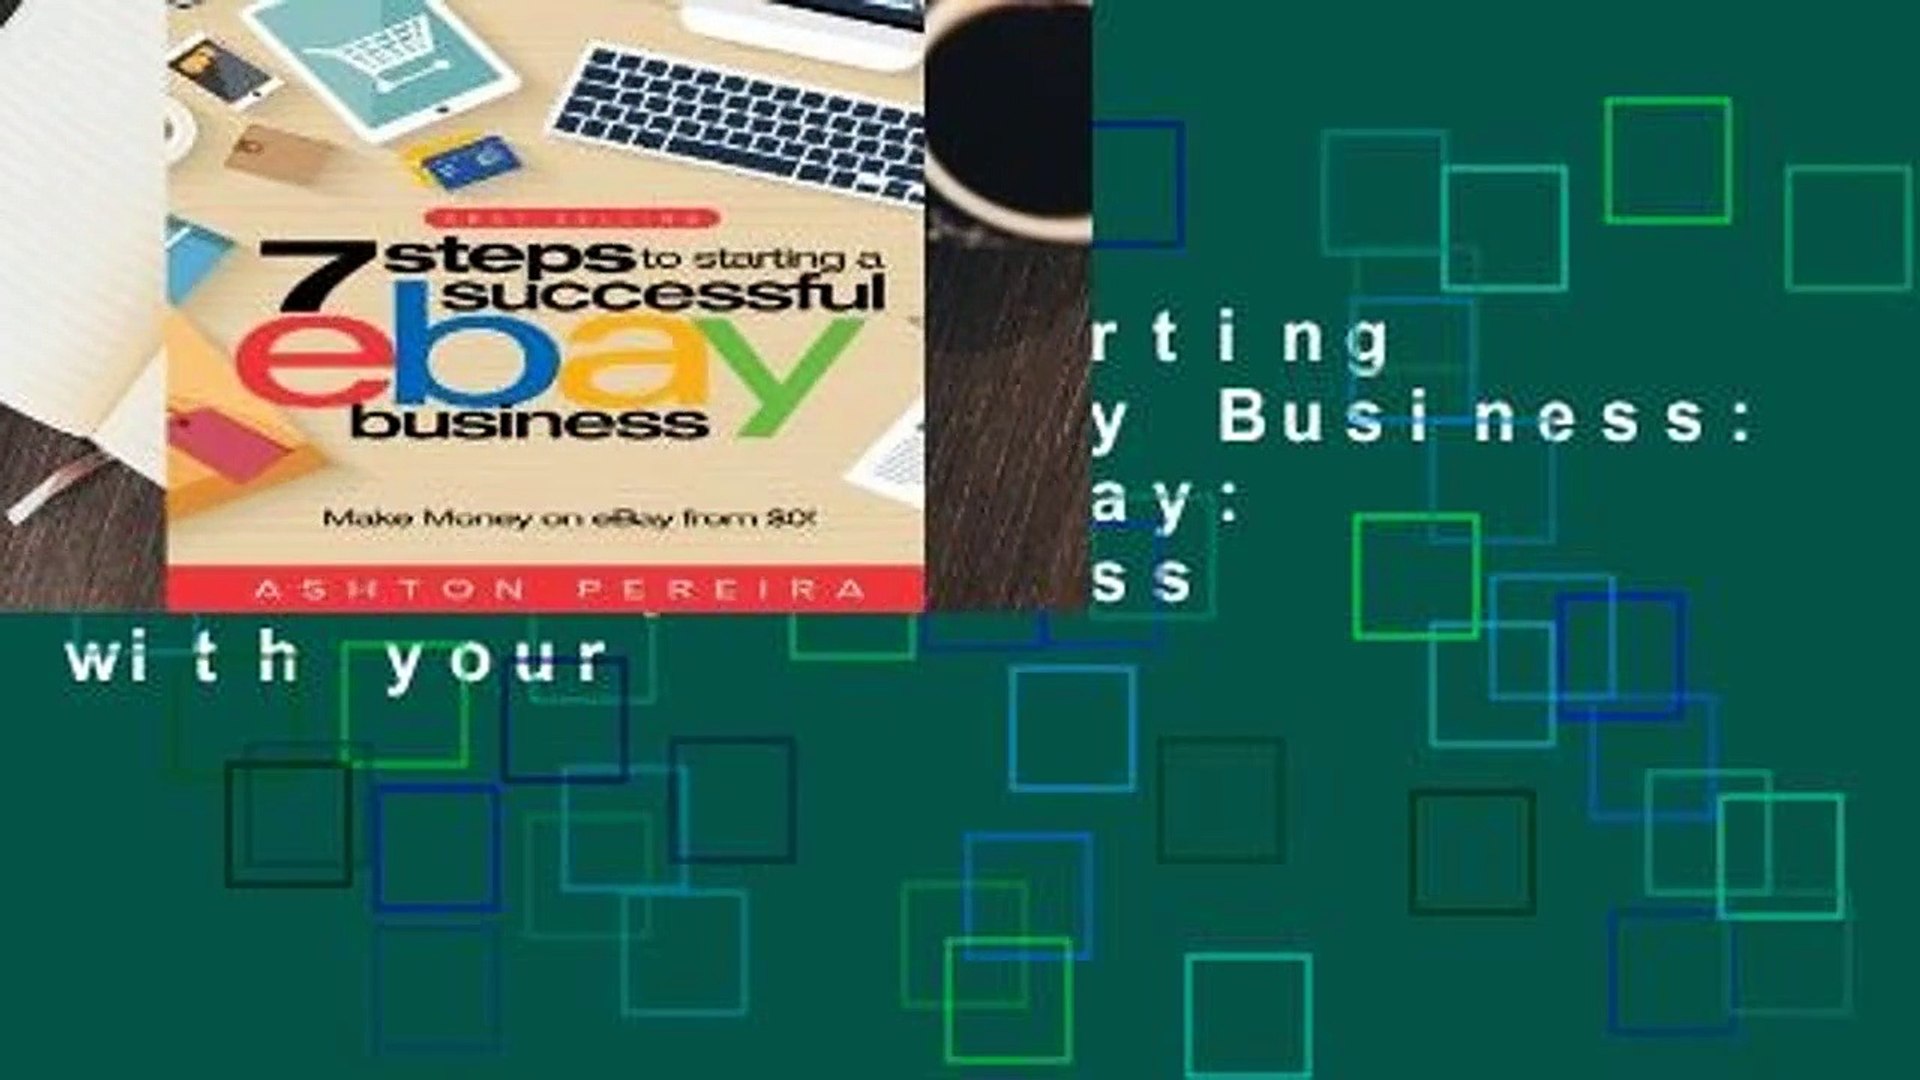 ⁣7 Steps to Starting a Successful eBay Business: Make Money on eBay: Be an eBay Success with your